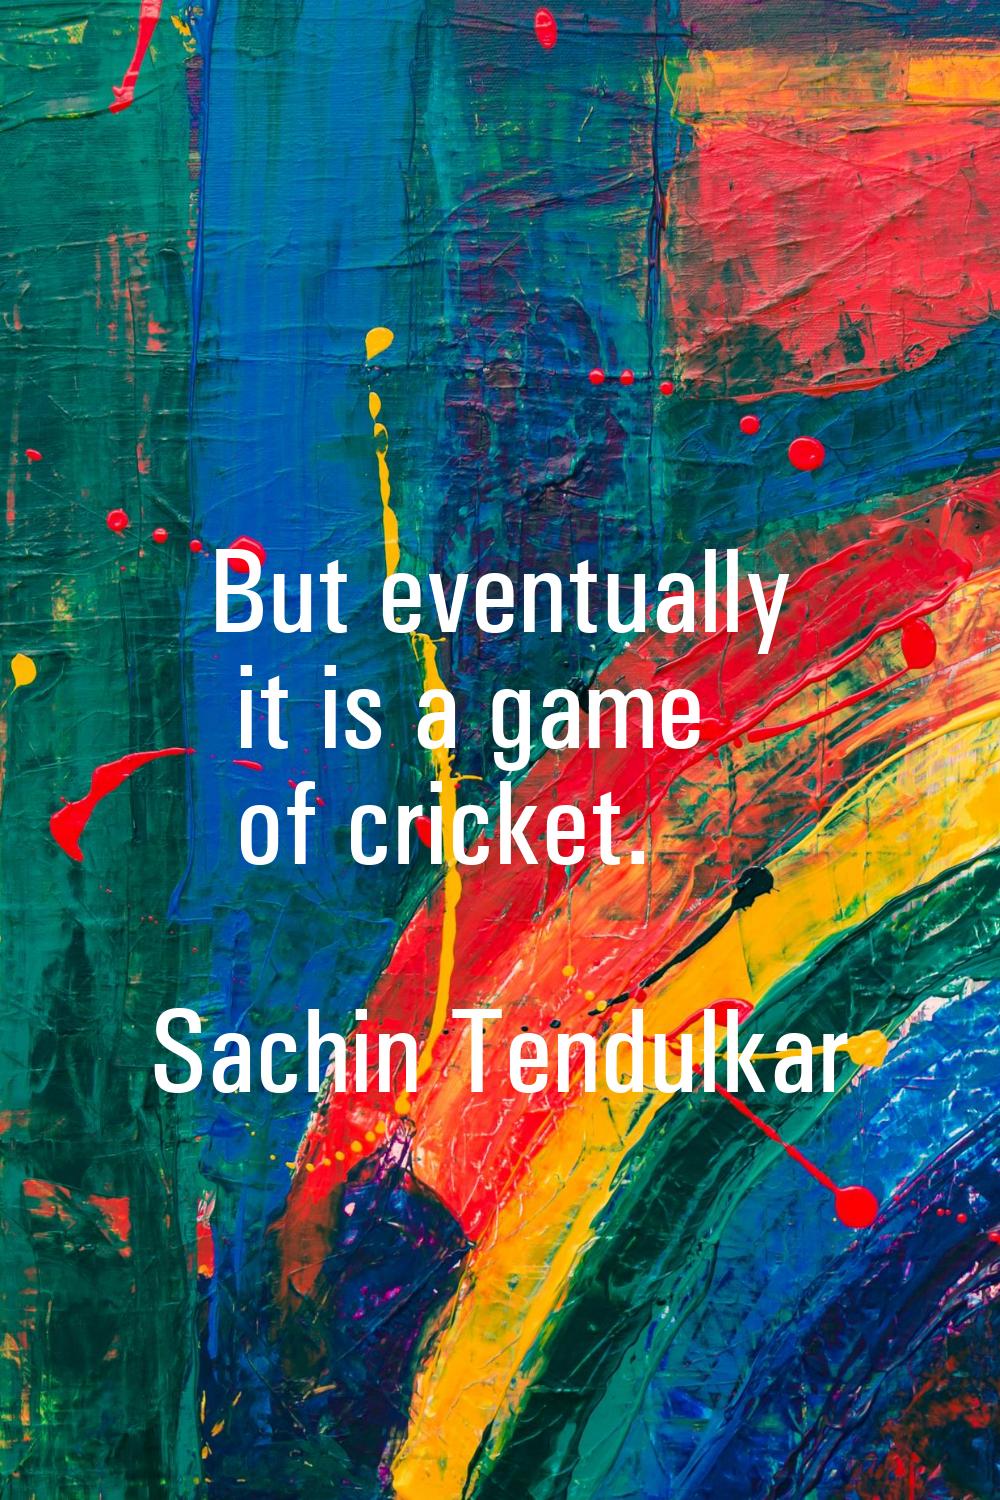 But eventually it is a game of cricket.